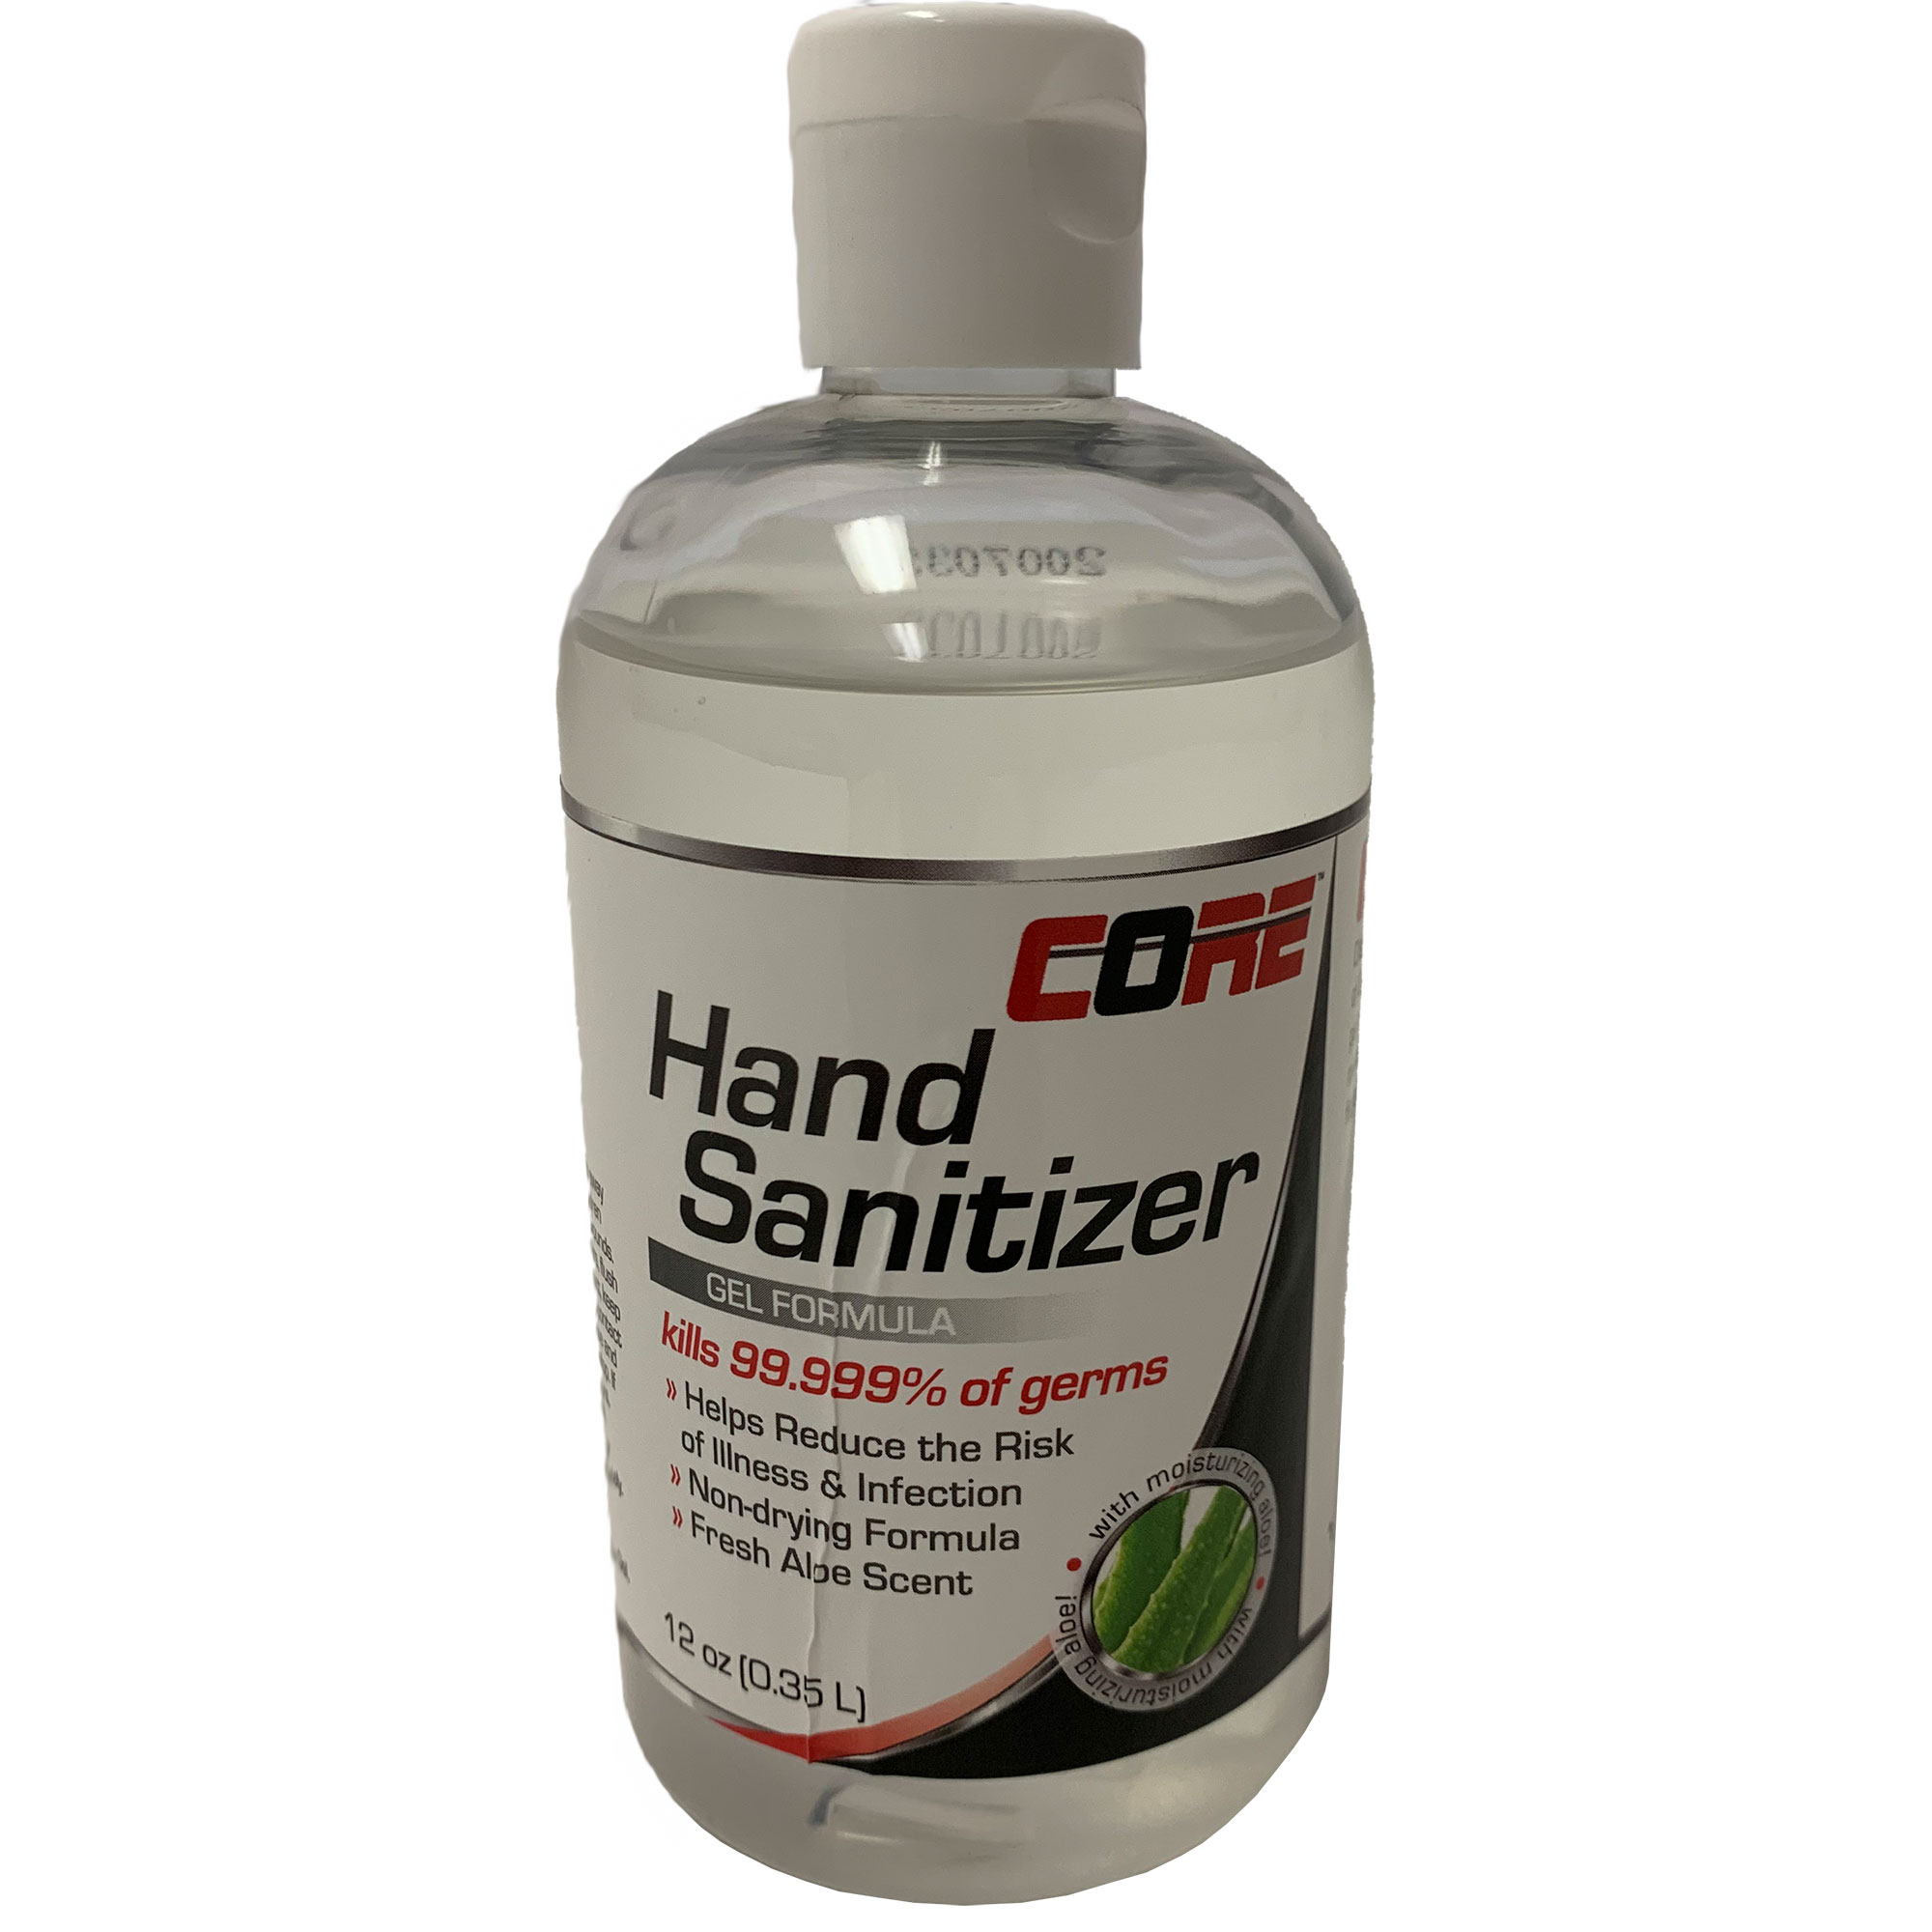 Core Hand Sanitizer Gel with Aloe, Kills 99.999% of Germs, 12oz Flip-Top Squeeze Bottle